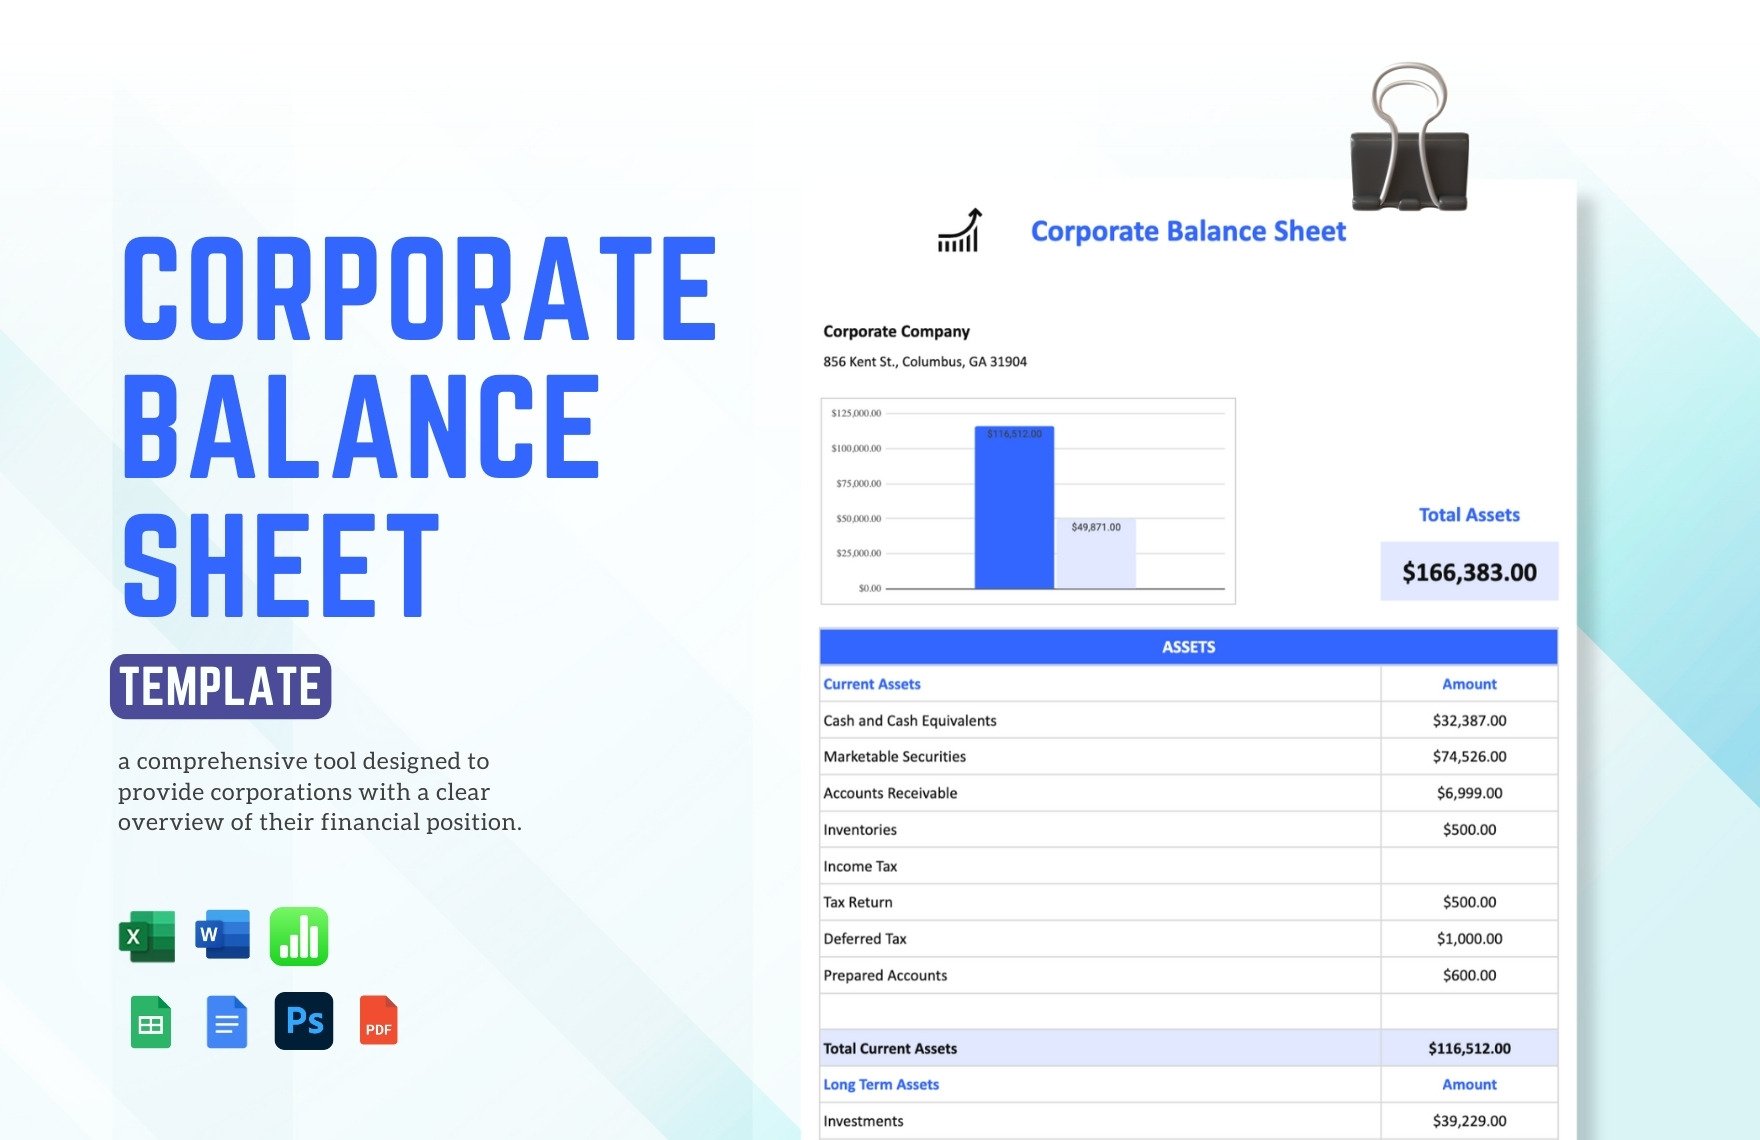 Corporate Balance Sheet Template in Word, Google Docs, Excel, PDF, Google Sheets, PSD, Apple Numbers